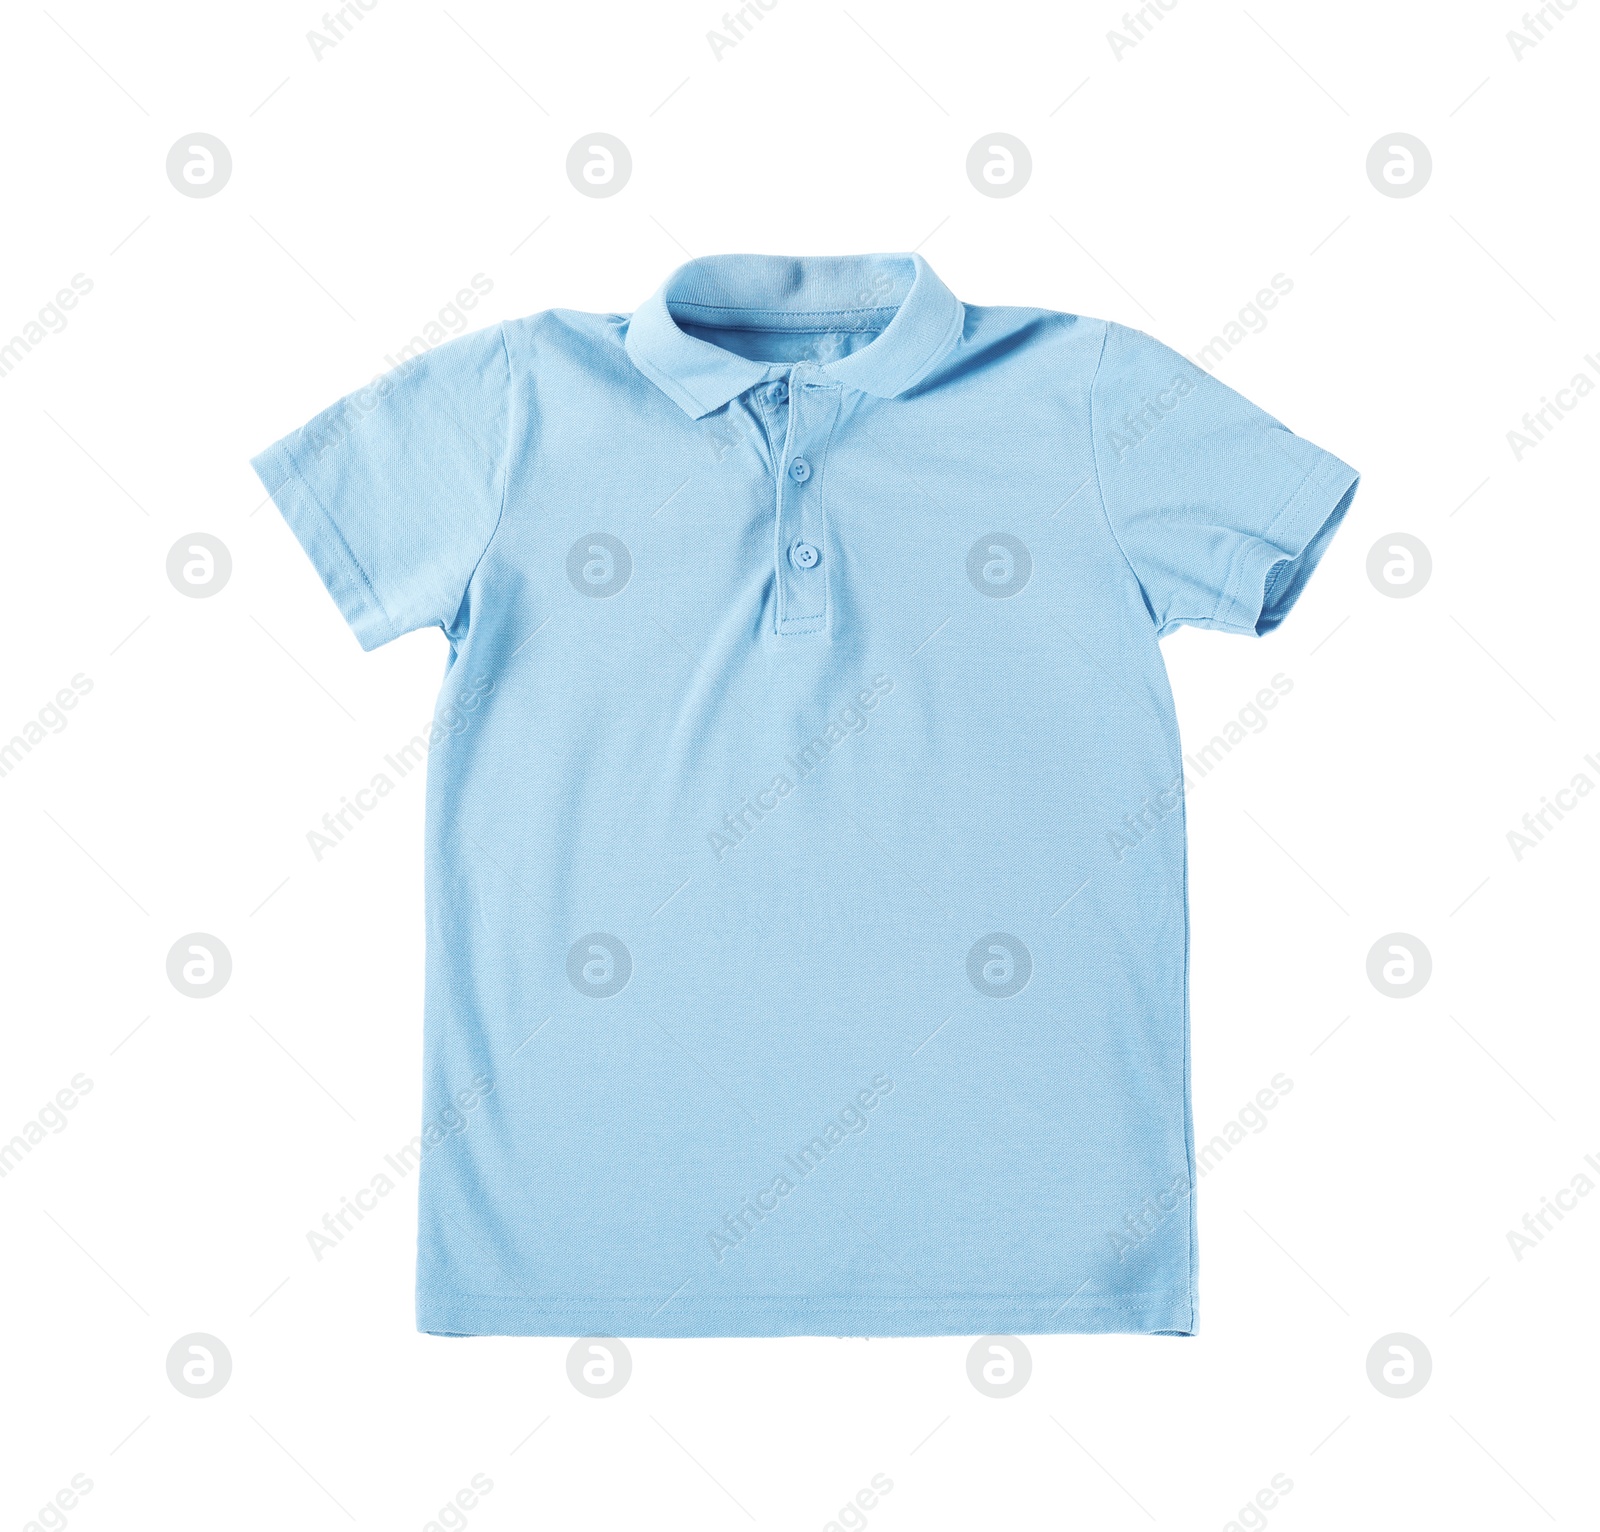 Photo of Light blue t-shirt isolated on white, top view. Stylish school uniform